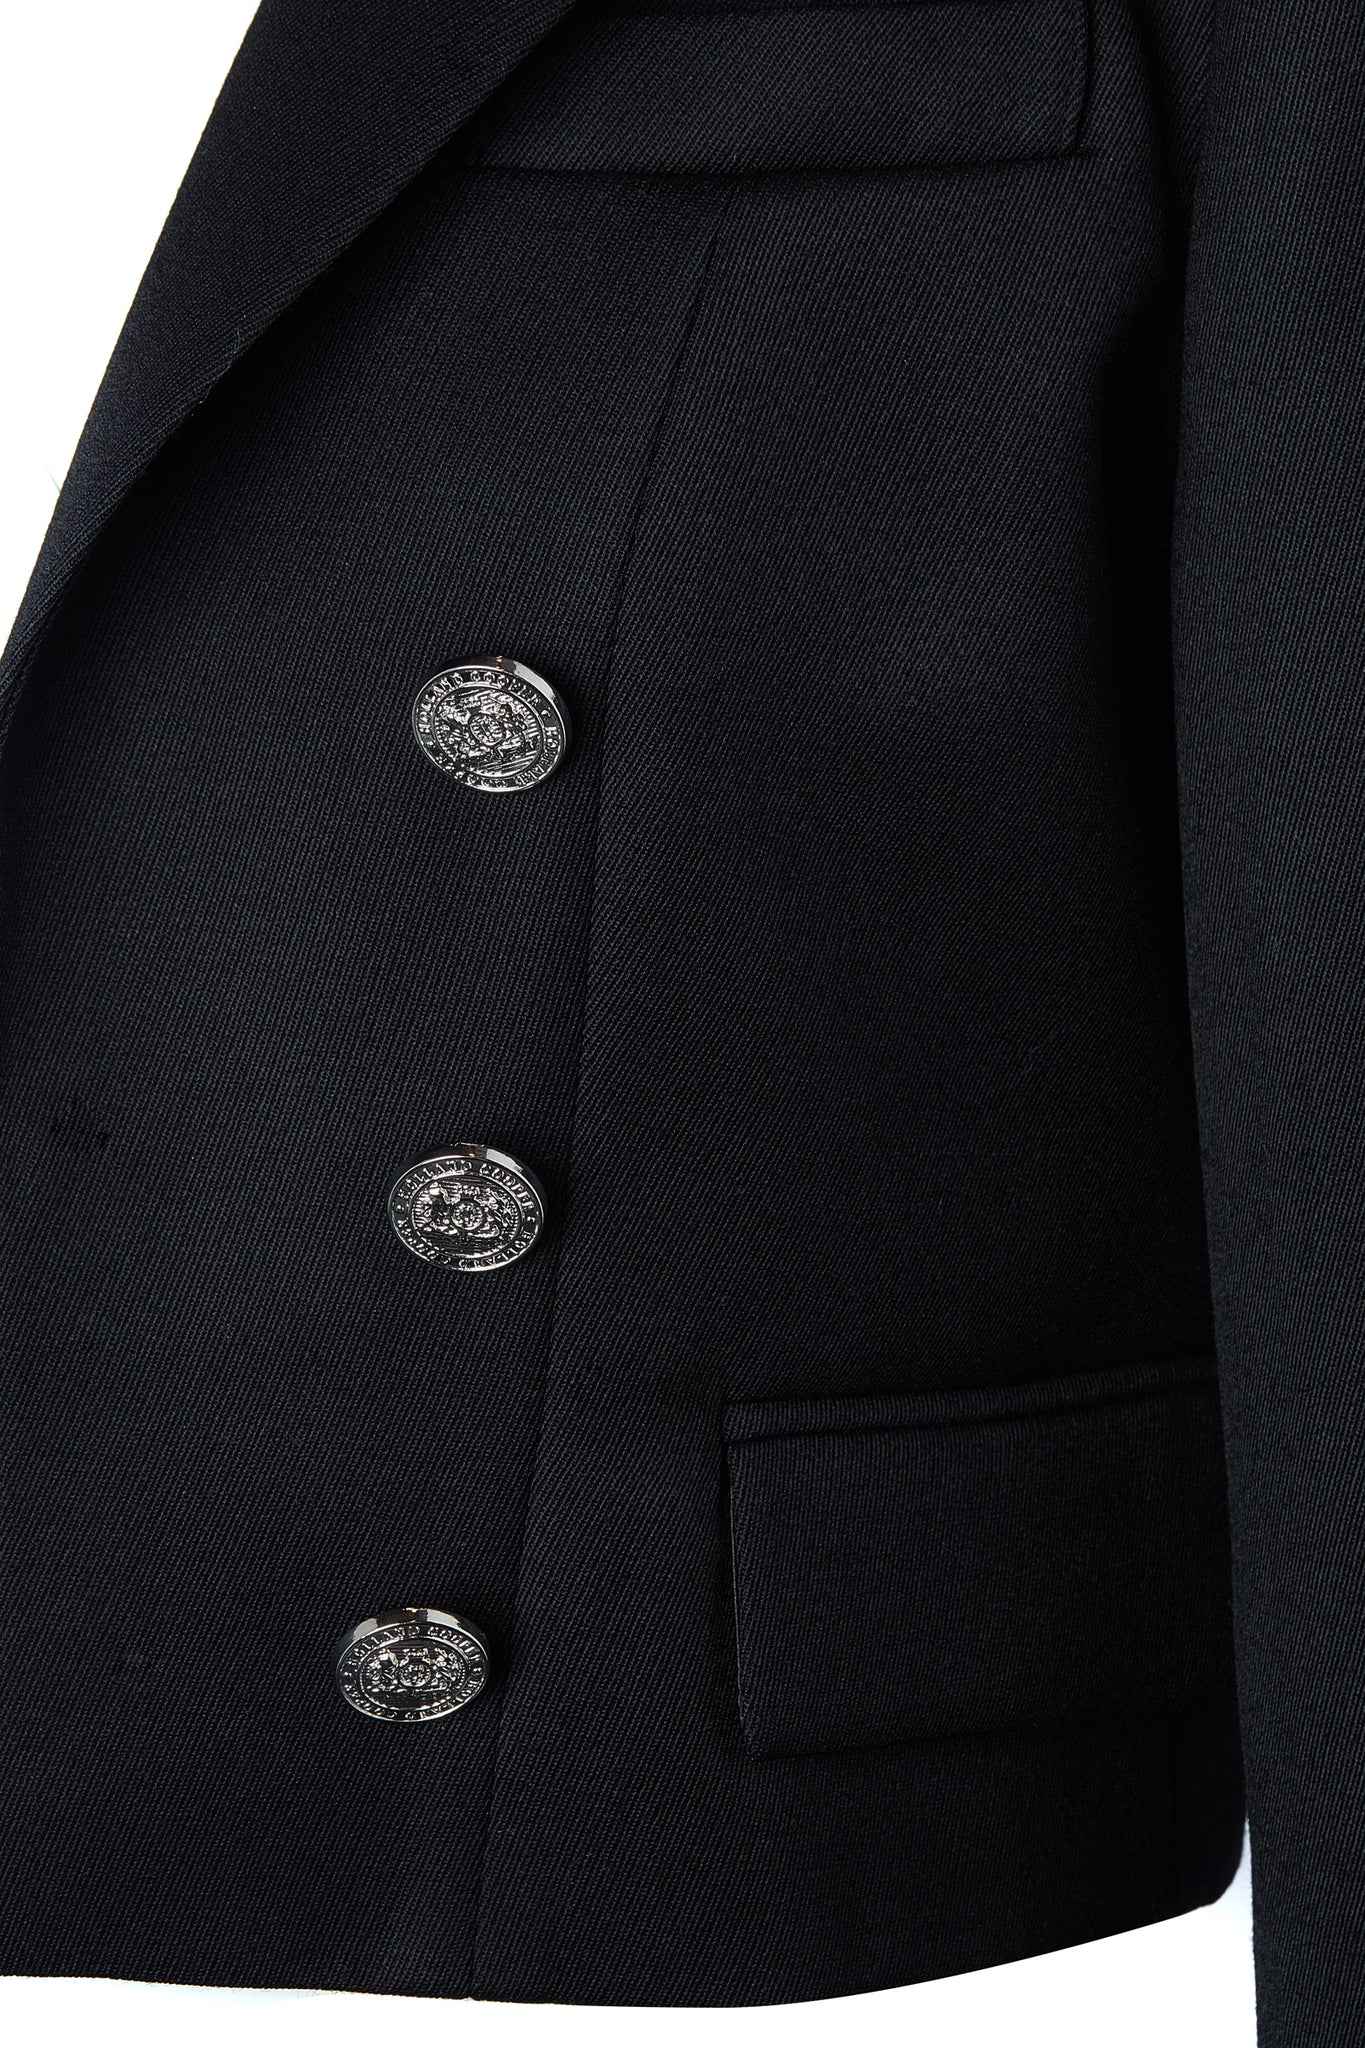 button detail on front of British made tailored cropped jacket in black with welt pockets and gold button detail down the front and on sleeves